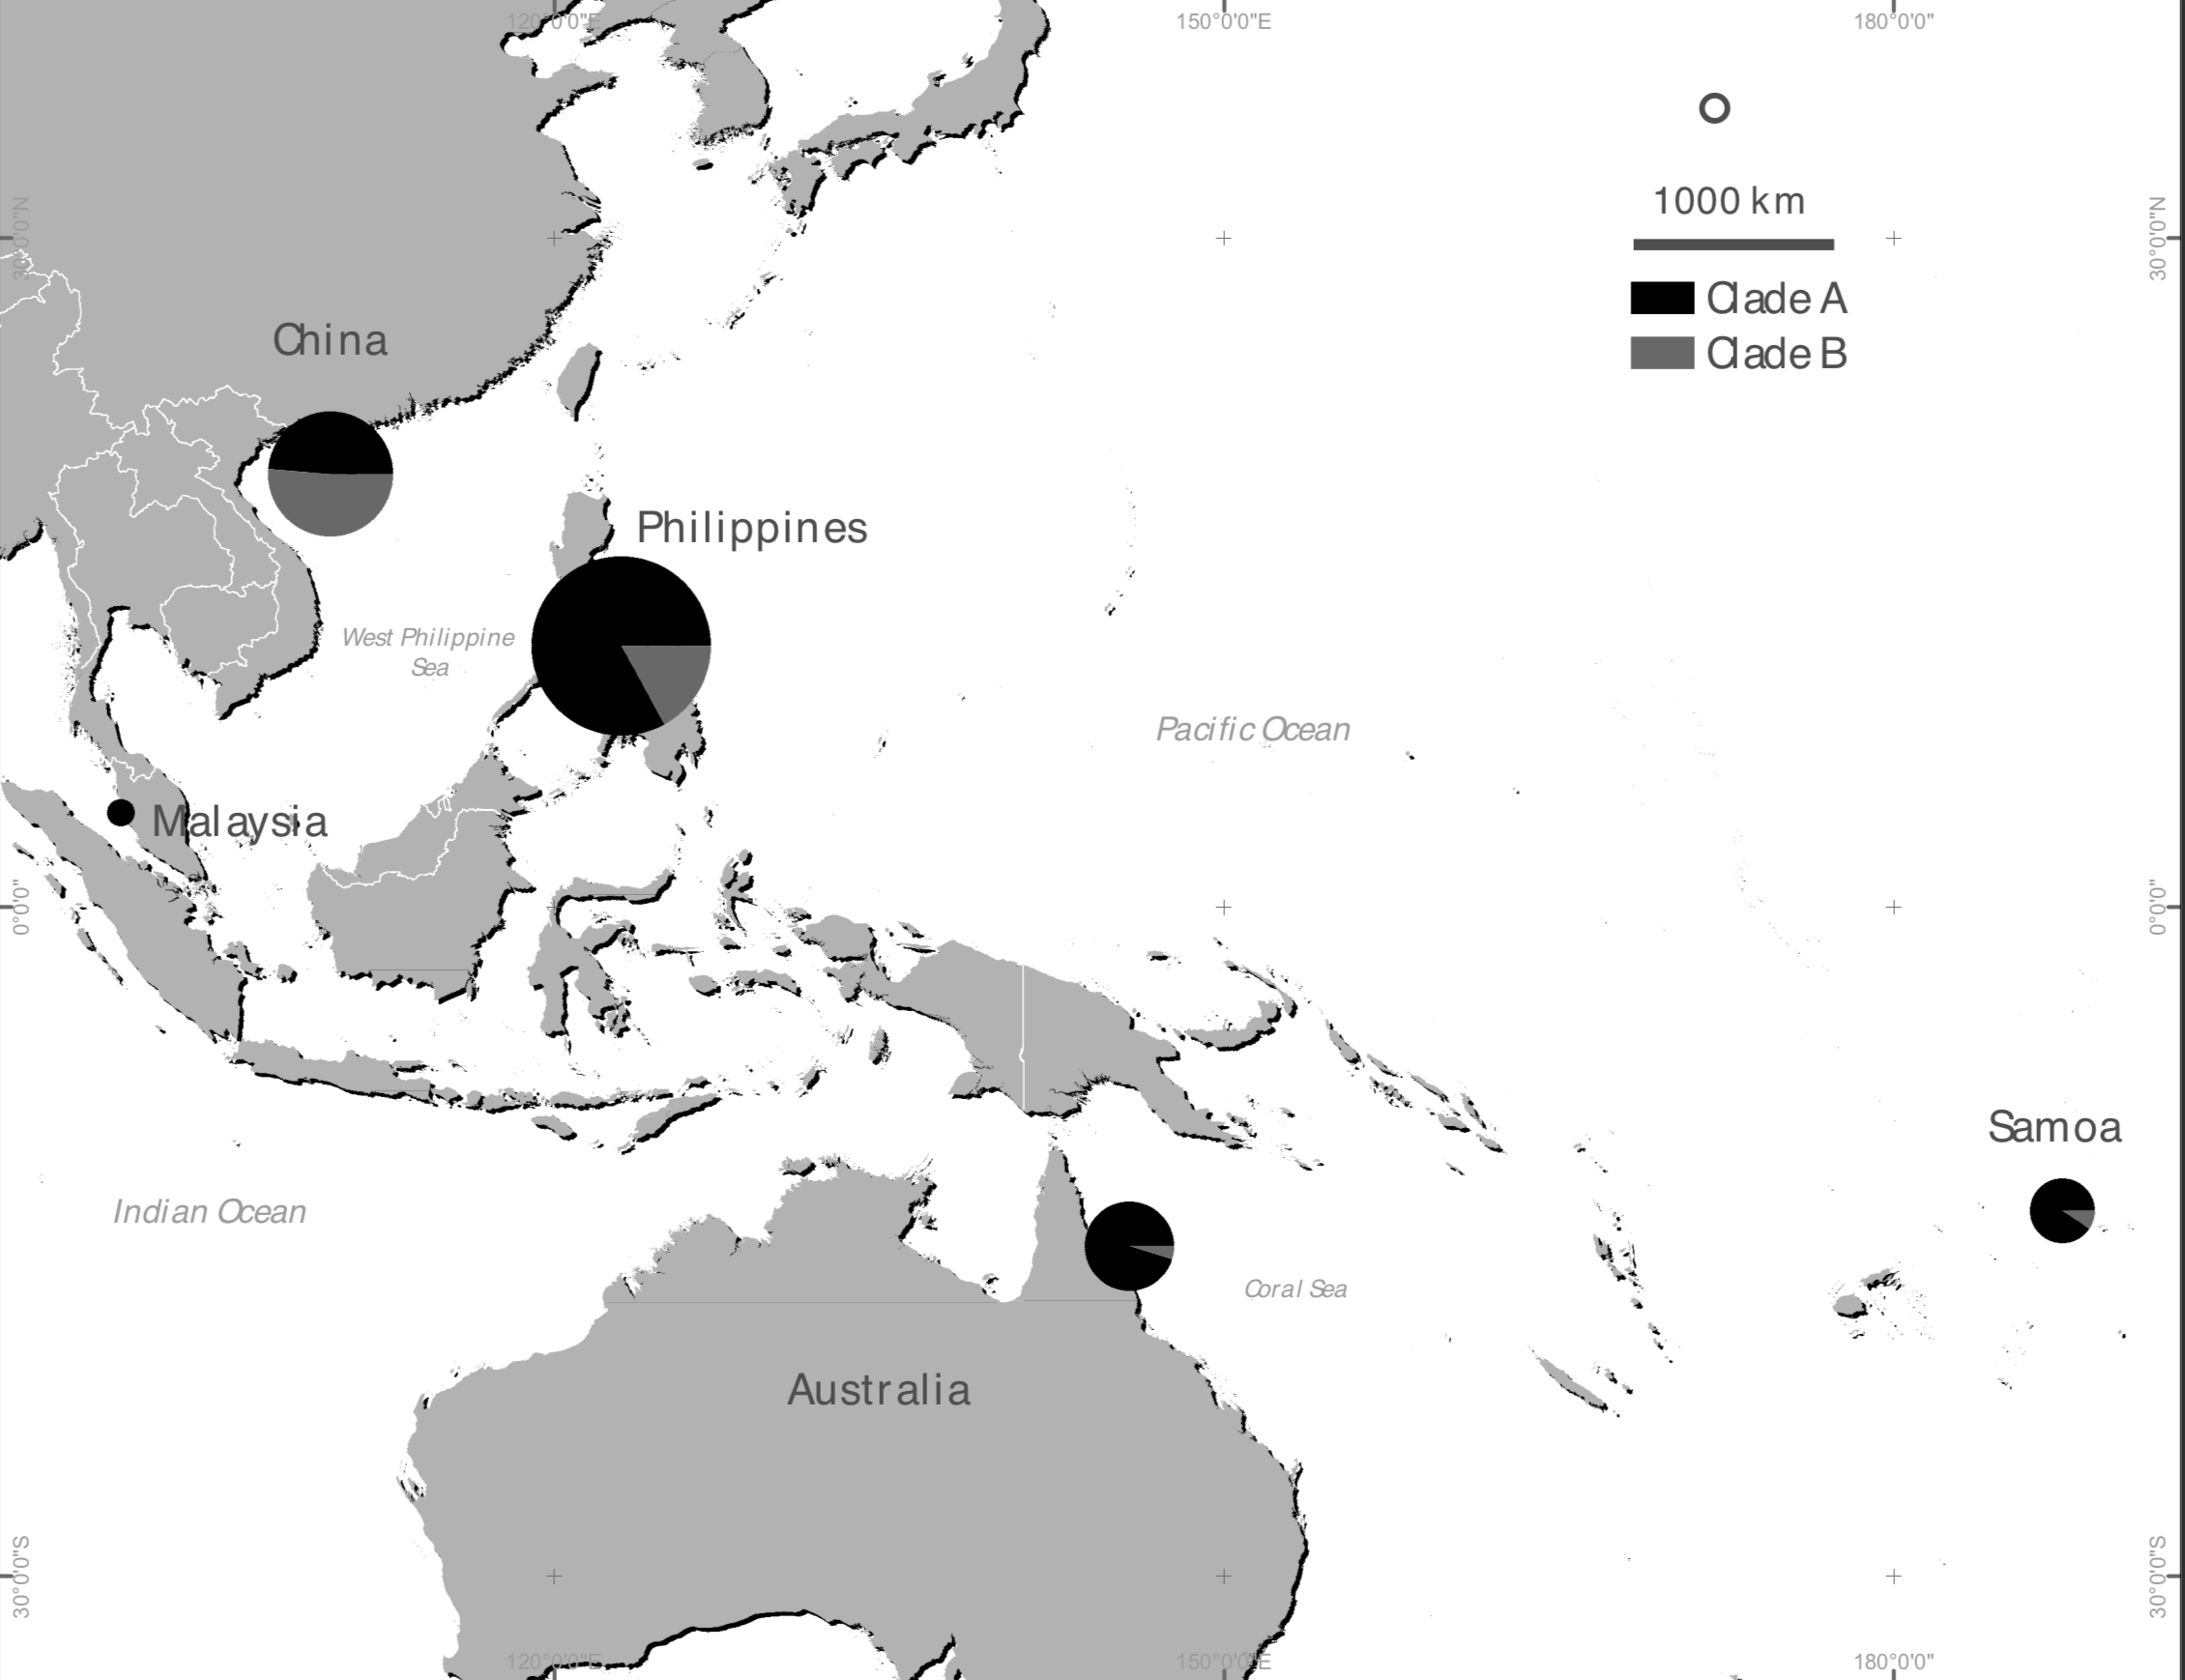 Clade distribution in Asia and Pacific